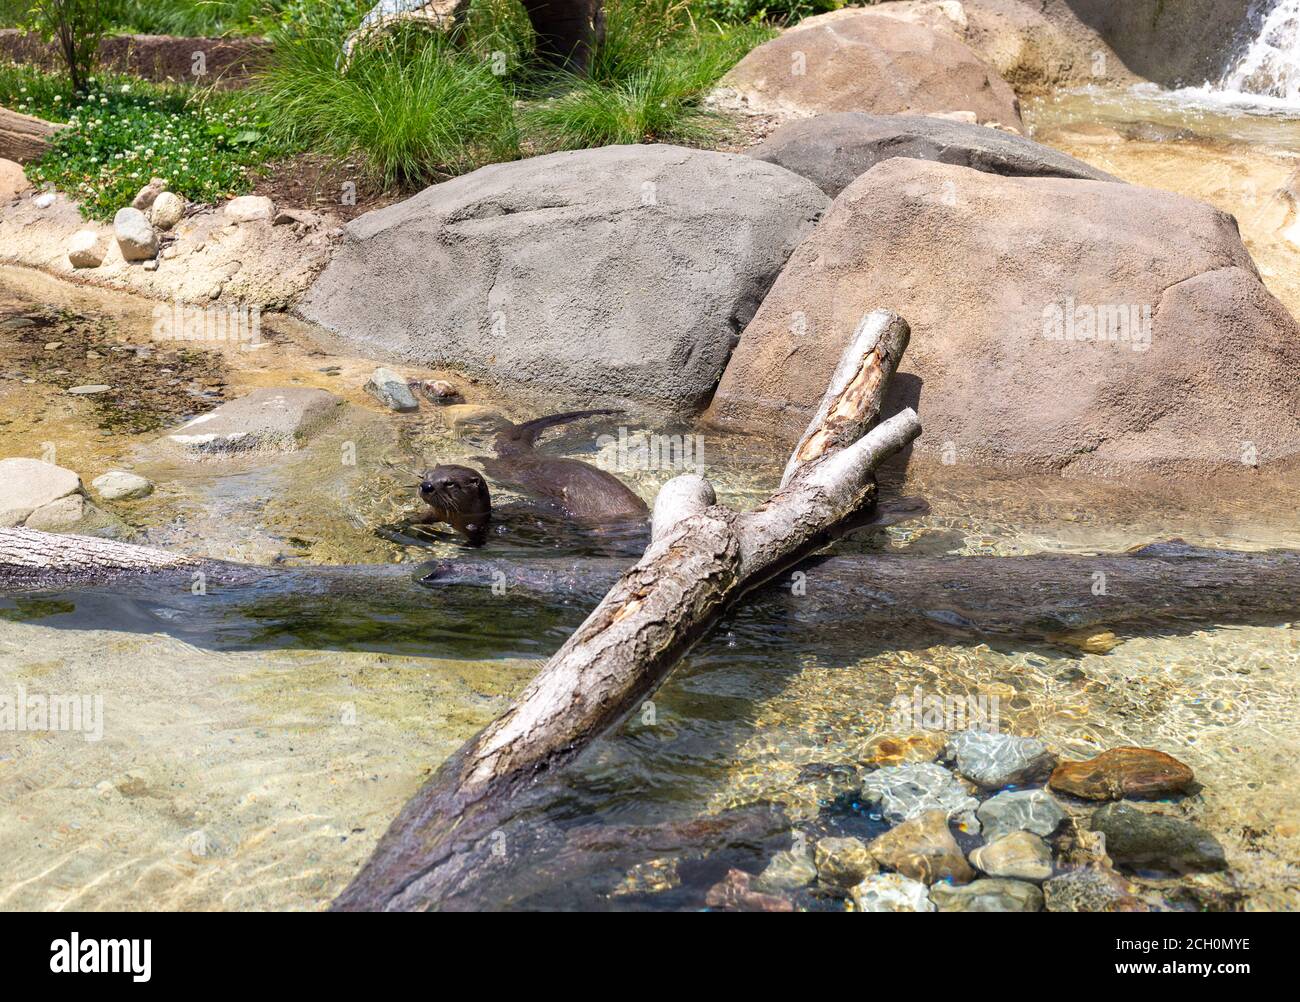 A otter swims in his enclosure at the Fort Wayne Children's Zoo. Stock Photo